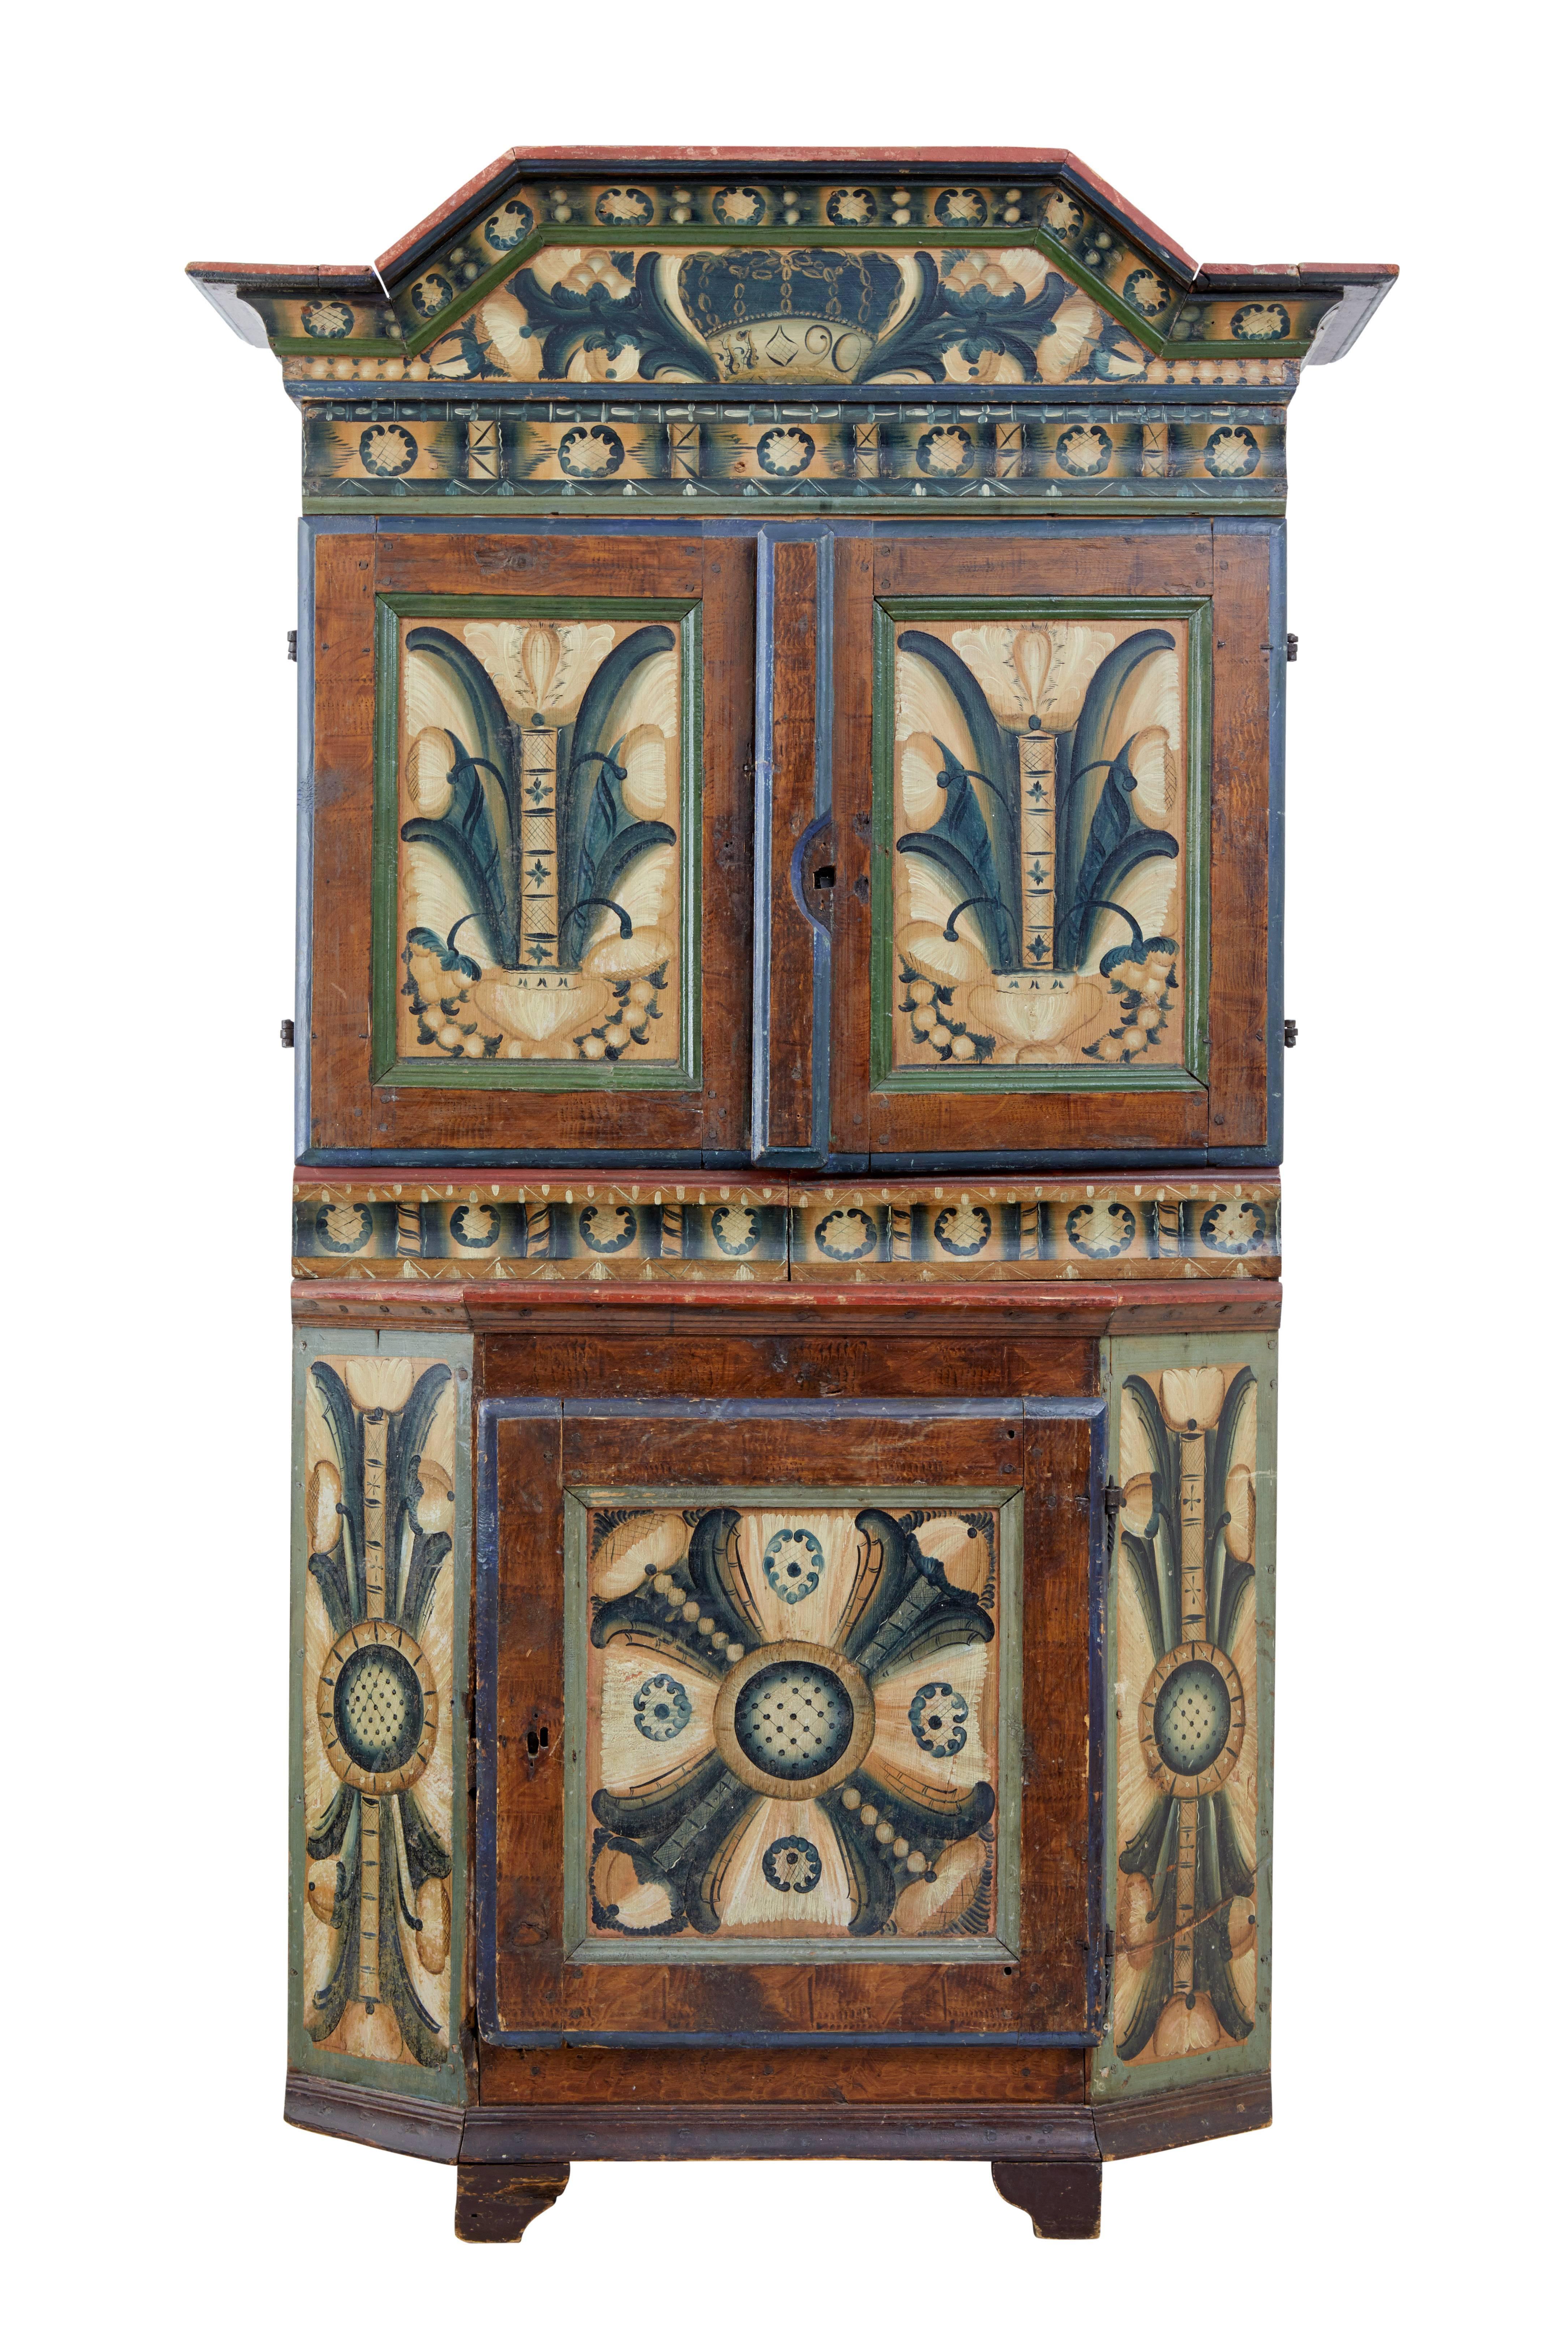 Rare piece of Swedish Folk Art cabinet work, circa 1790.

From Dalarna in Sweden which is in the centre of the country, we are pleased to offer this in original condition.

One piece with the cornice being removable.

Hand-painted in greens